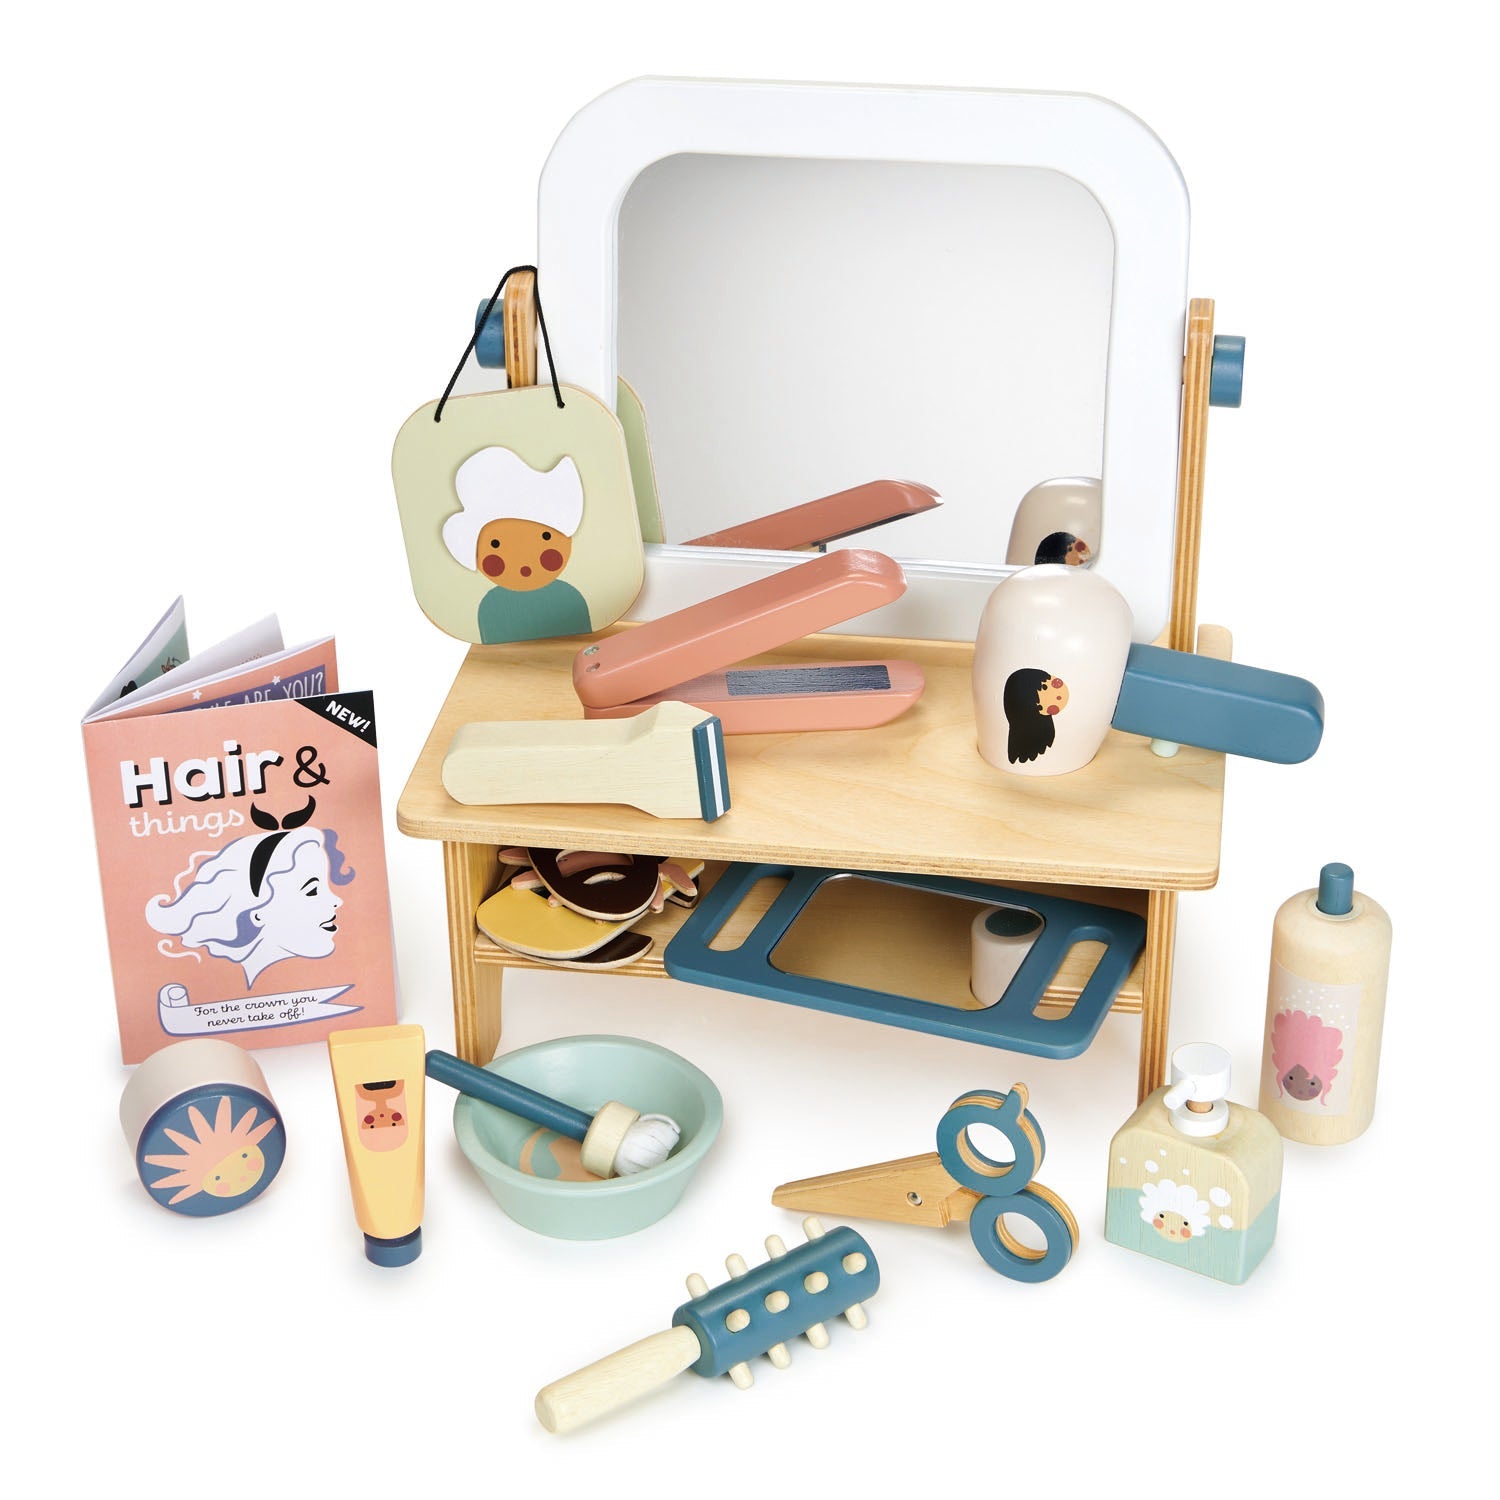 Tender Leaf Toys Hair Salon - A versatile role-play toy for children, providing a range of hair treatments and styling opportunities. Gender-neutral design with a swivel mirror, storage shelf, and hair dryer slot